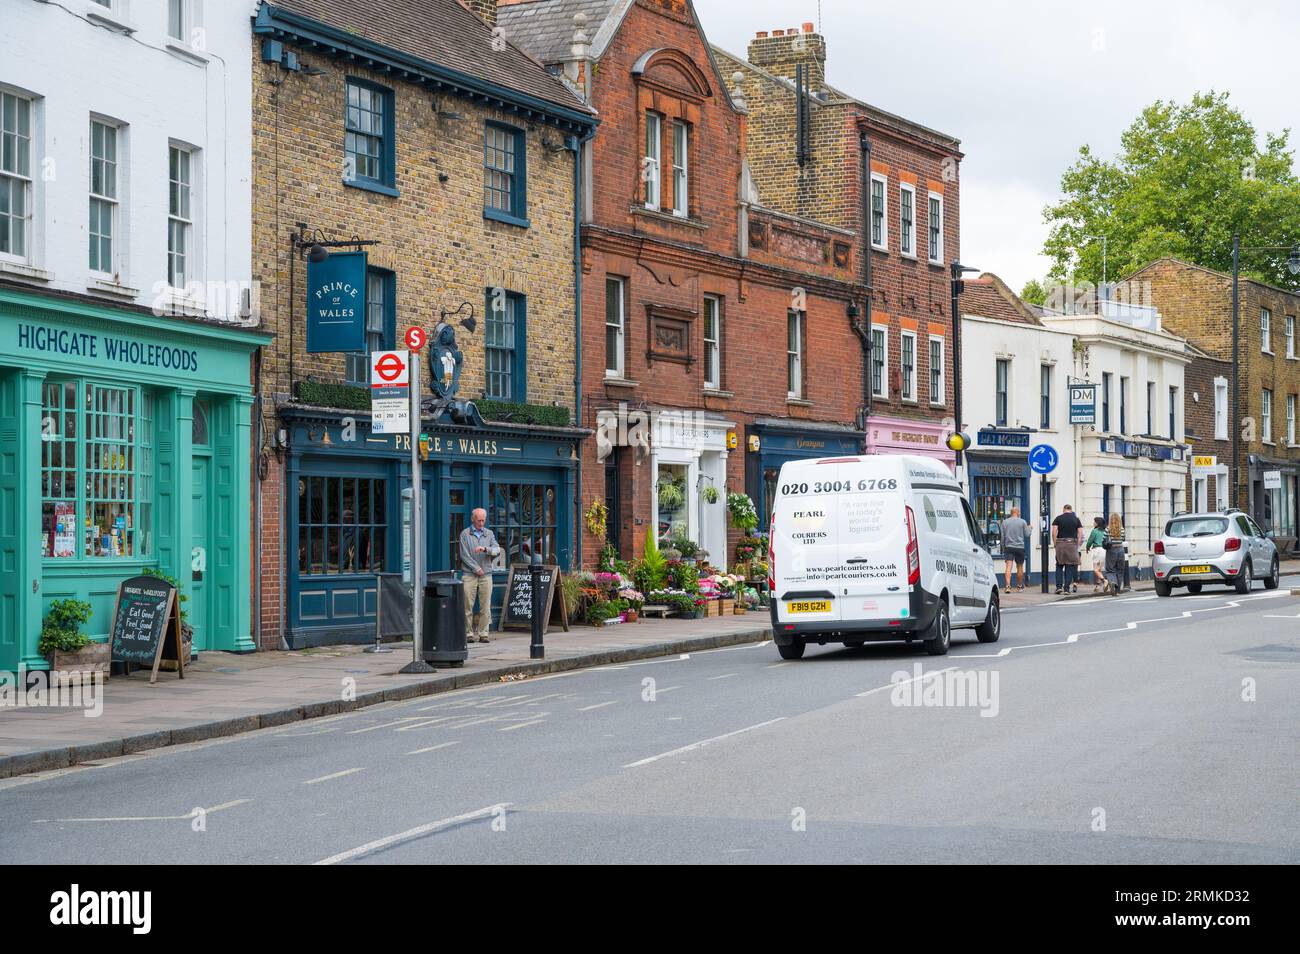 People out and about in Highgate Village on Highgate High Street. London N6, England, UK Stock Photo